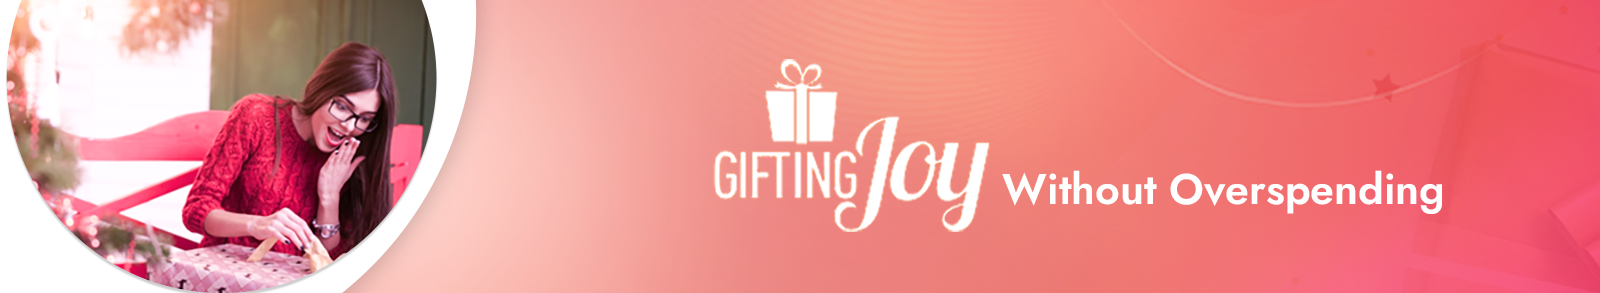 Gifting Joy, Without Overspending